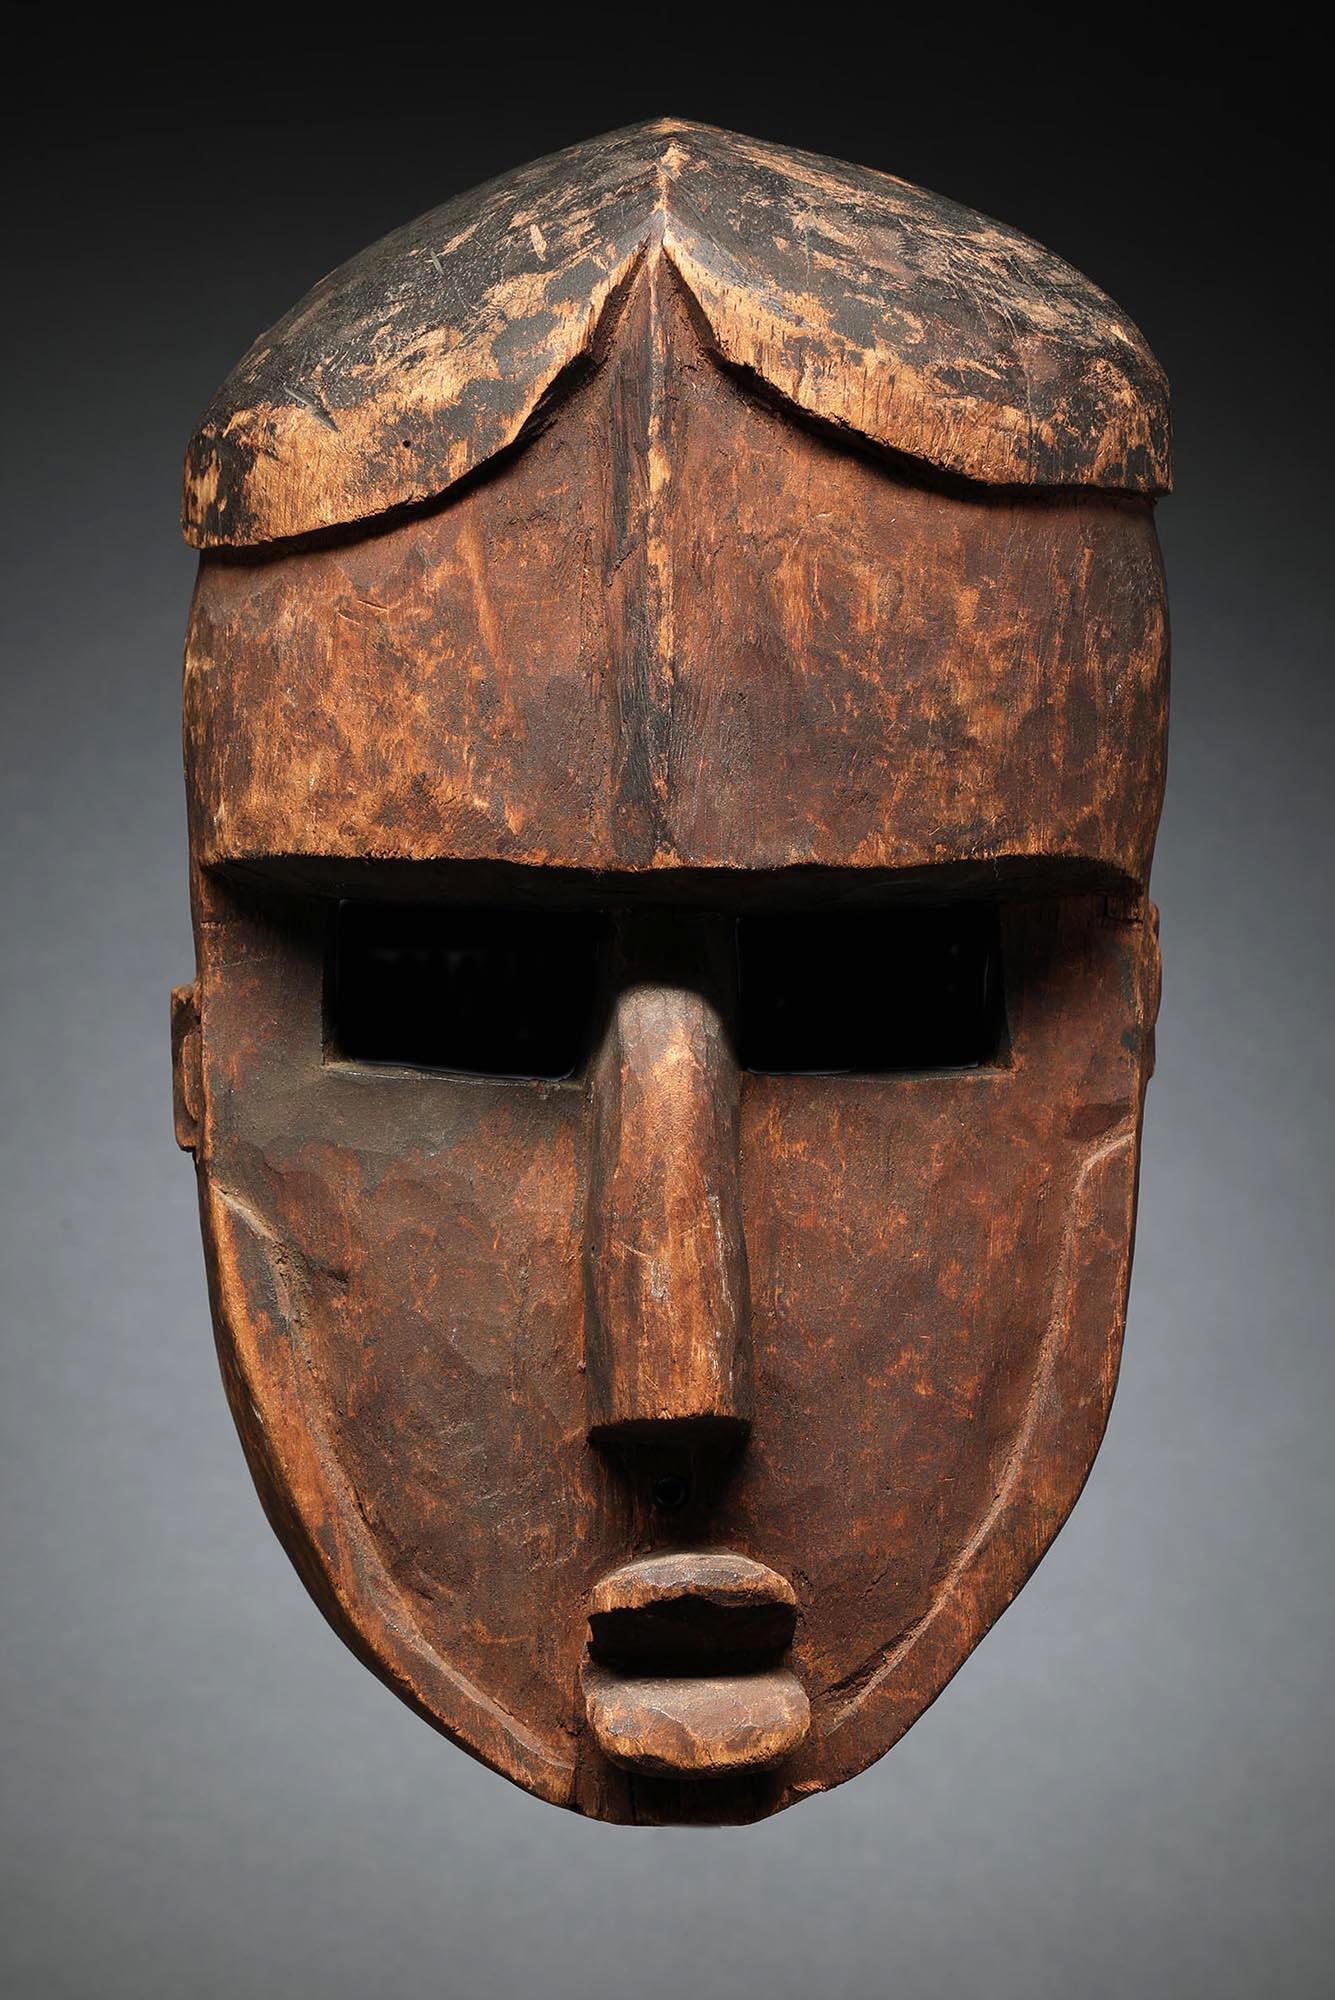 Congolese Strong Cubist Lwalwa Mask DRC Congo Zaire Early 20th Century Provenance